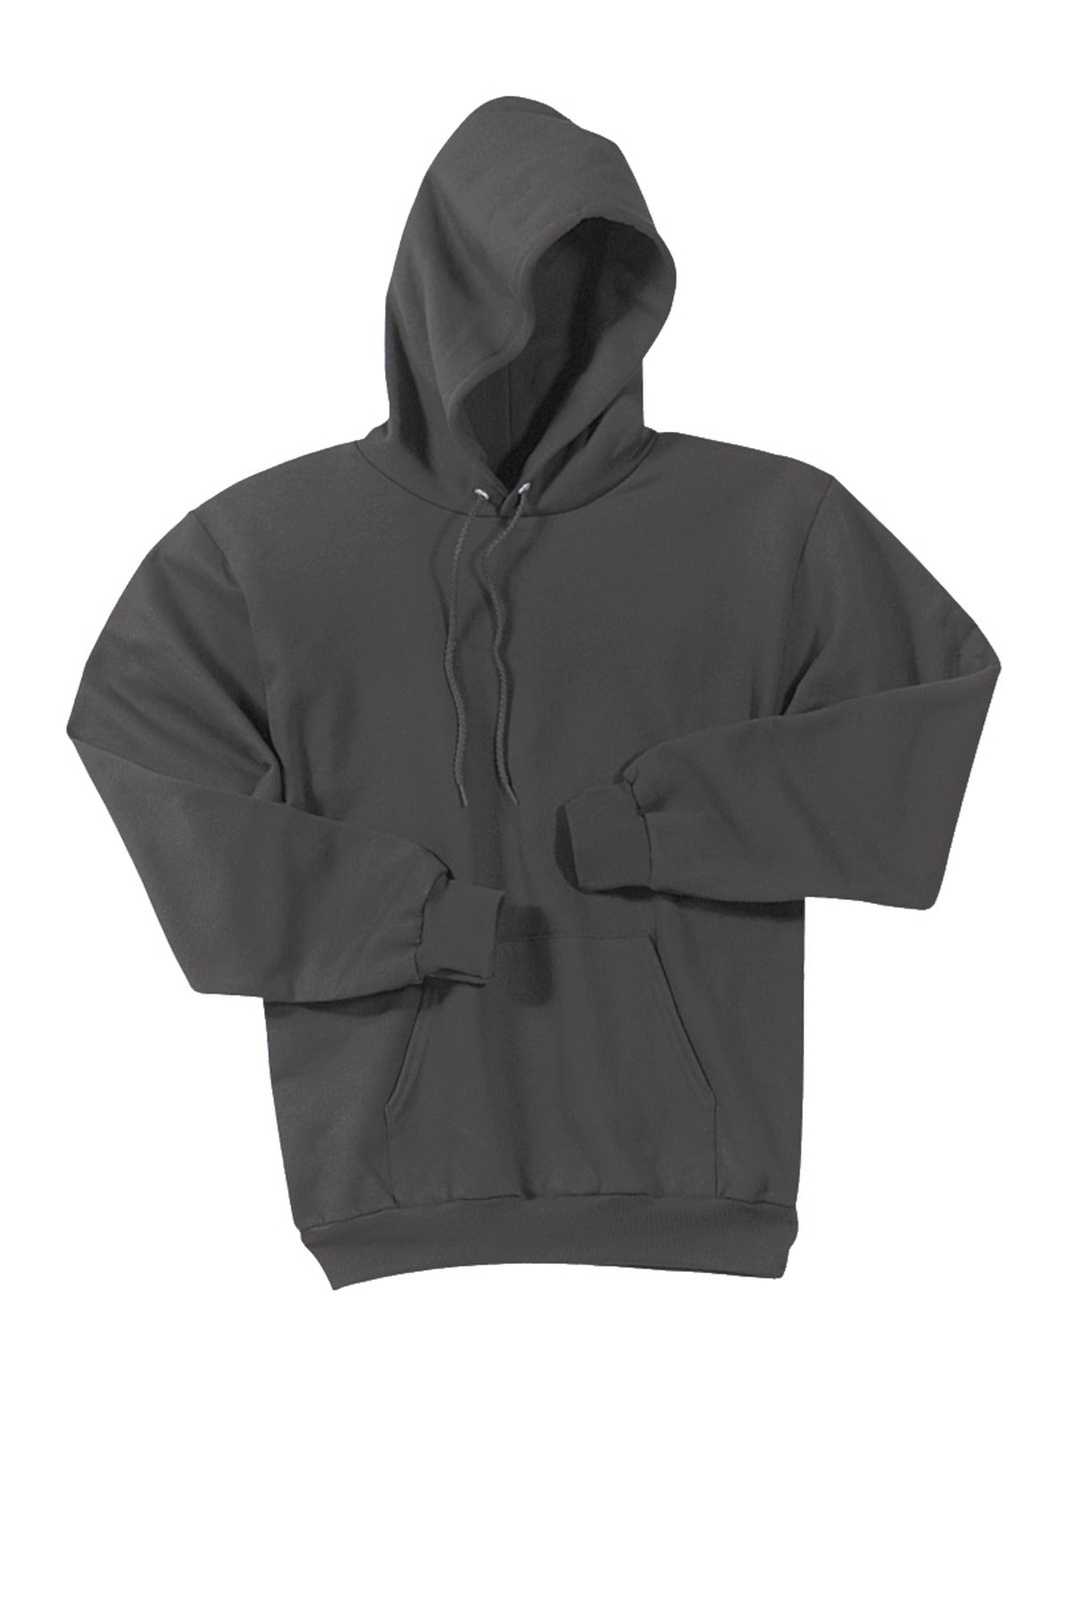 Port & Company PC90HT Tall Essential Fleece Pullover Hooded Sweatshirt - Charcoal - HIT a Double - 1